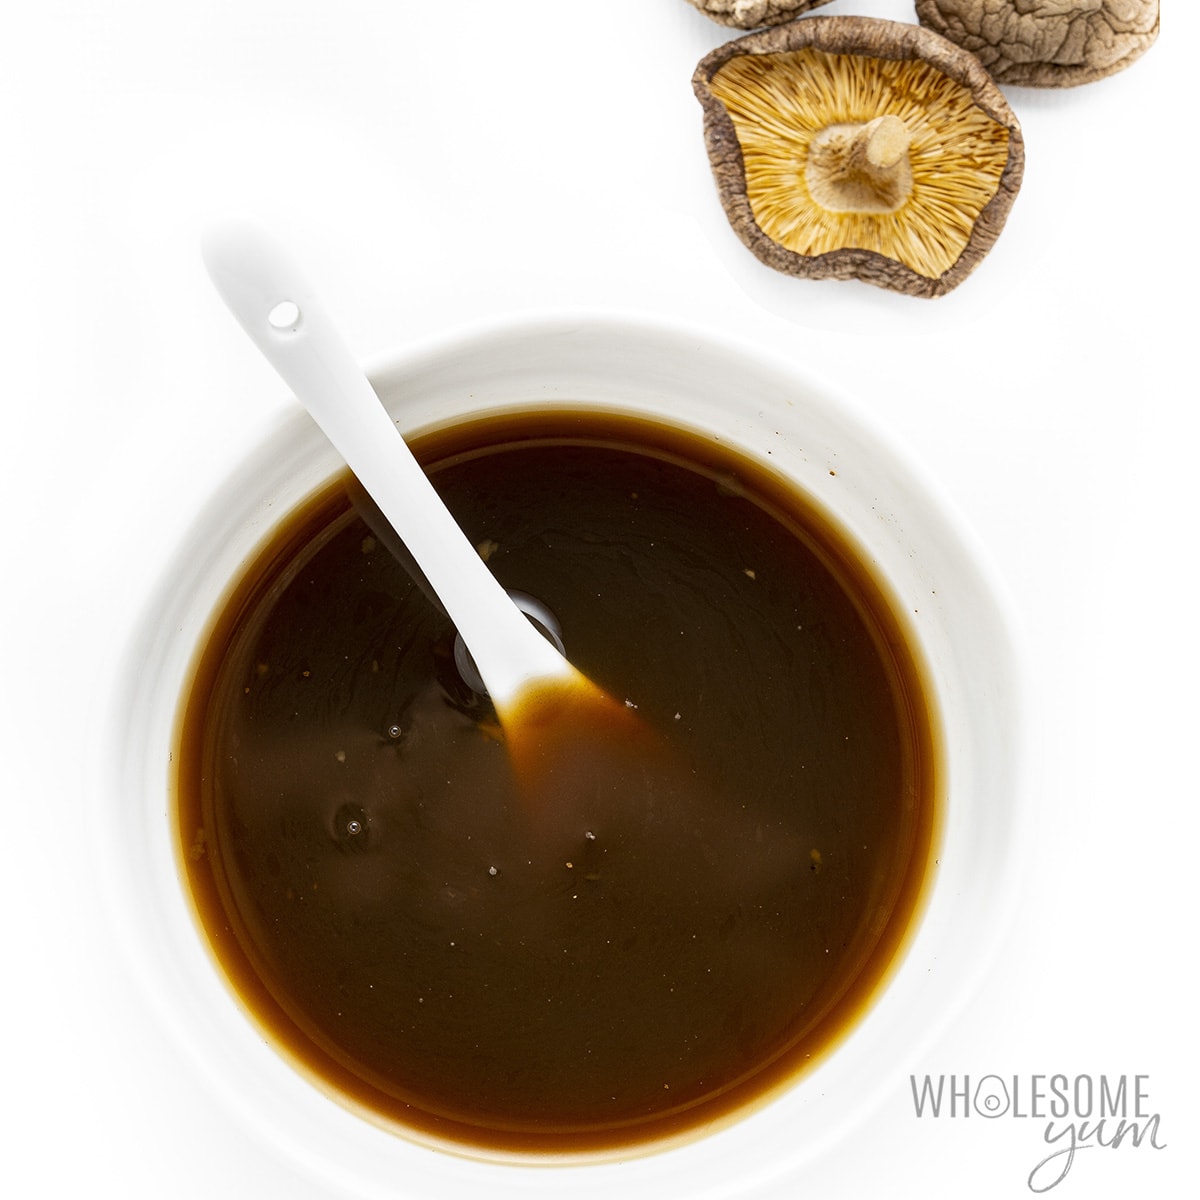 Homemade substitute for soy sauce in a bowl.